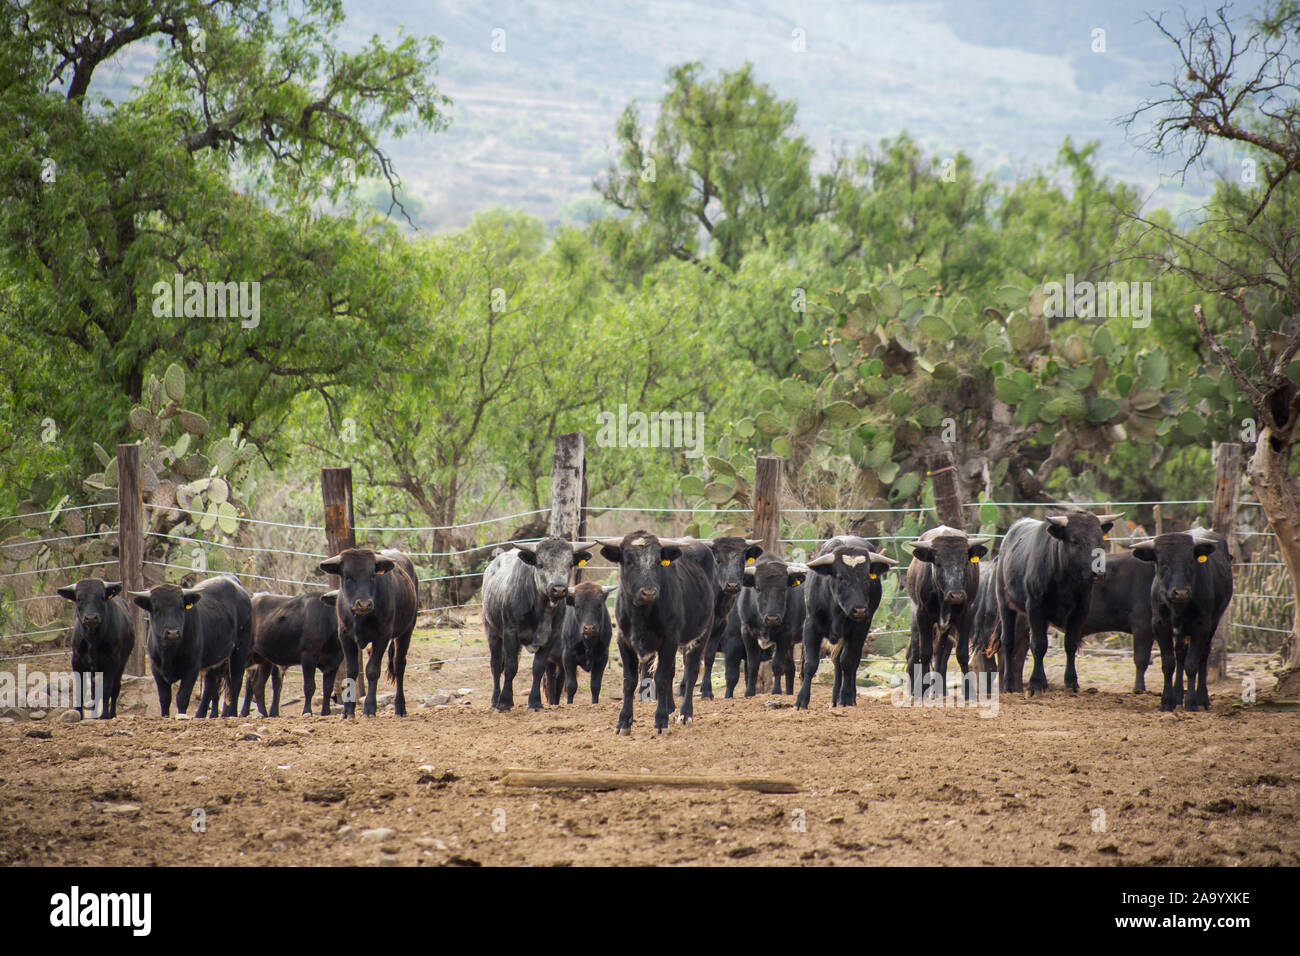 Bulls in a cattle raising ranch in mexico Stock Photo - Alamy